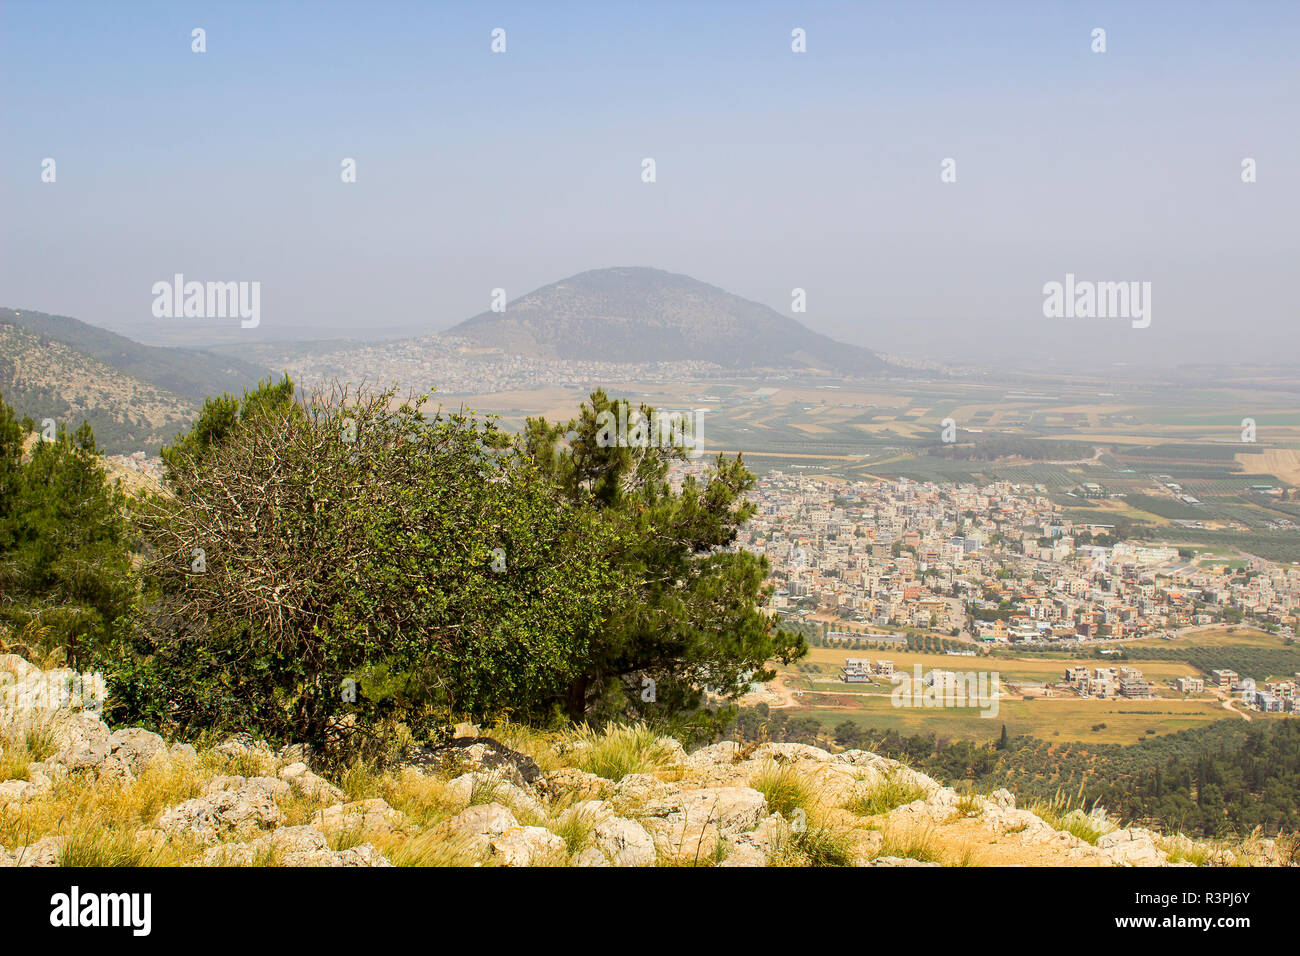 5 May 2018 A view of Mount Tabor in Israel from the mount Precipice. tradition has this as the place where an angry mob would have cast Jesus Christ o Stock Photo